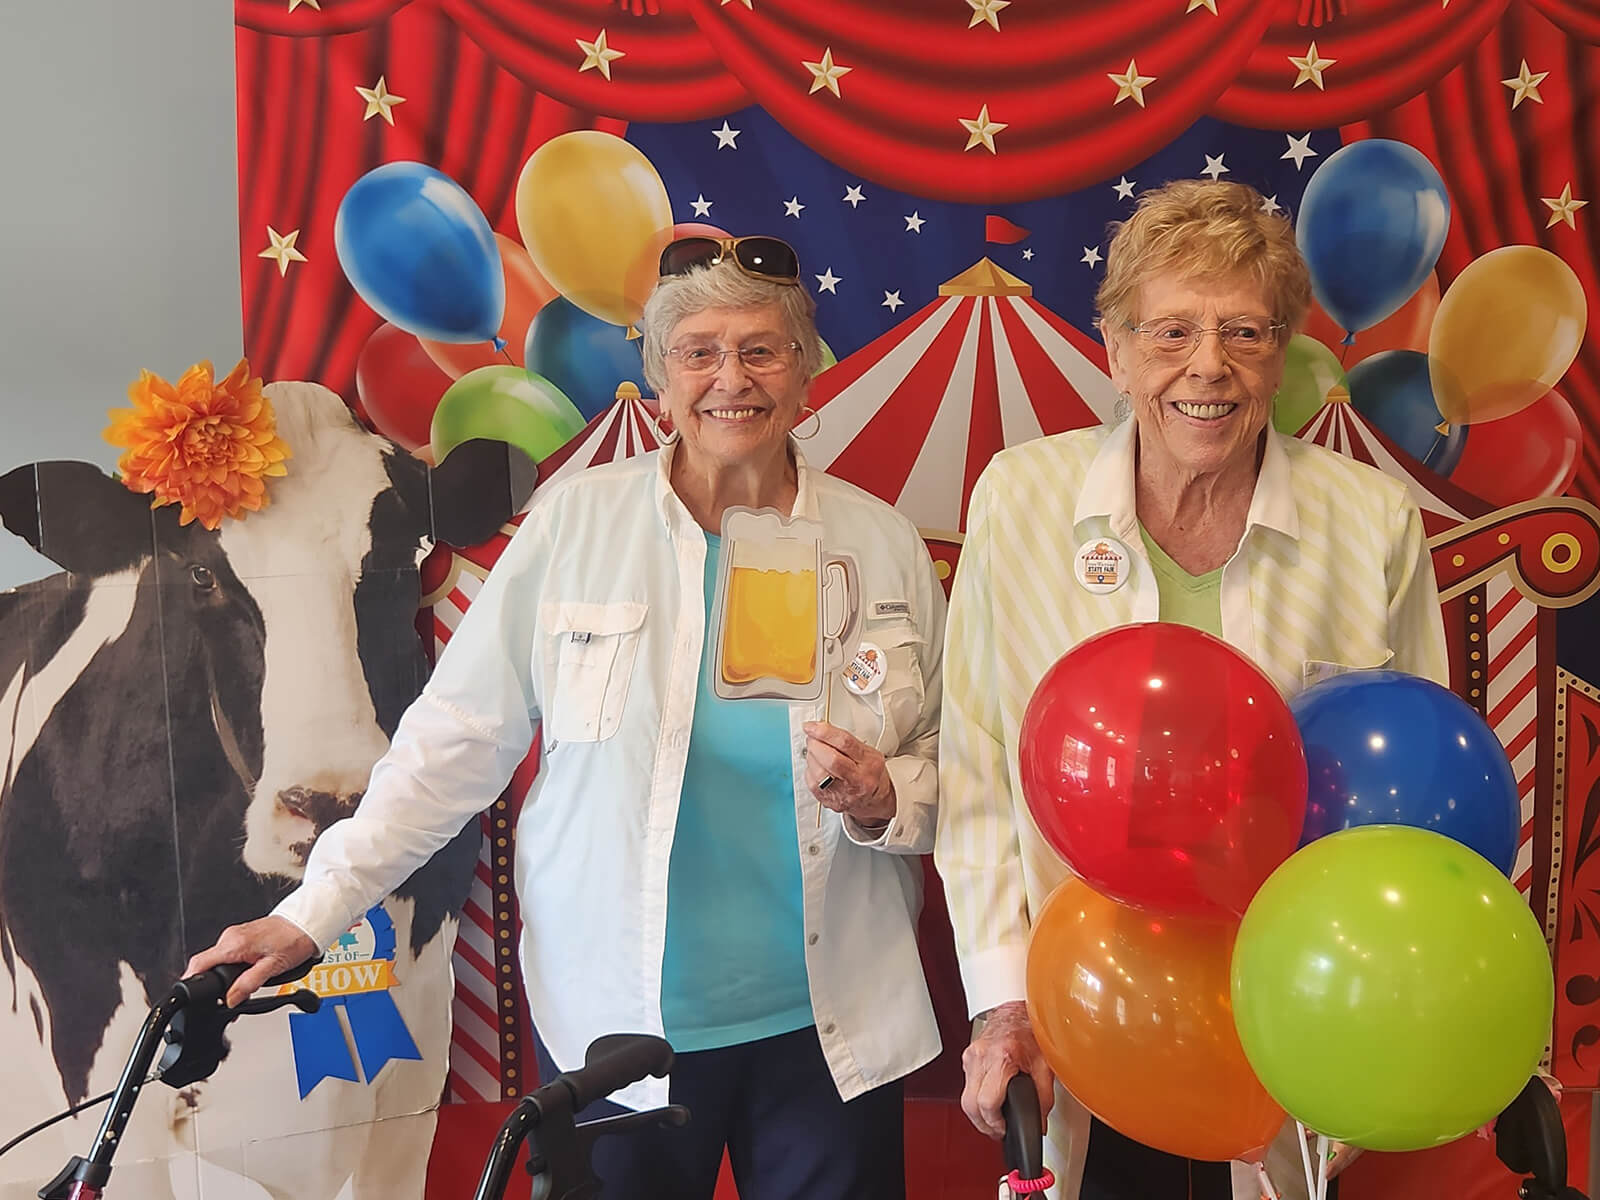 Seniors at The Waters of Excelsior having fun during a carnival-themed day with festive decorations and activities, enhancing community joy.